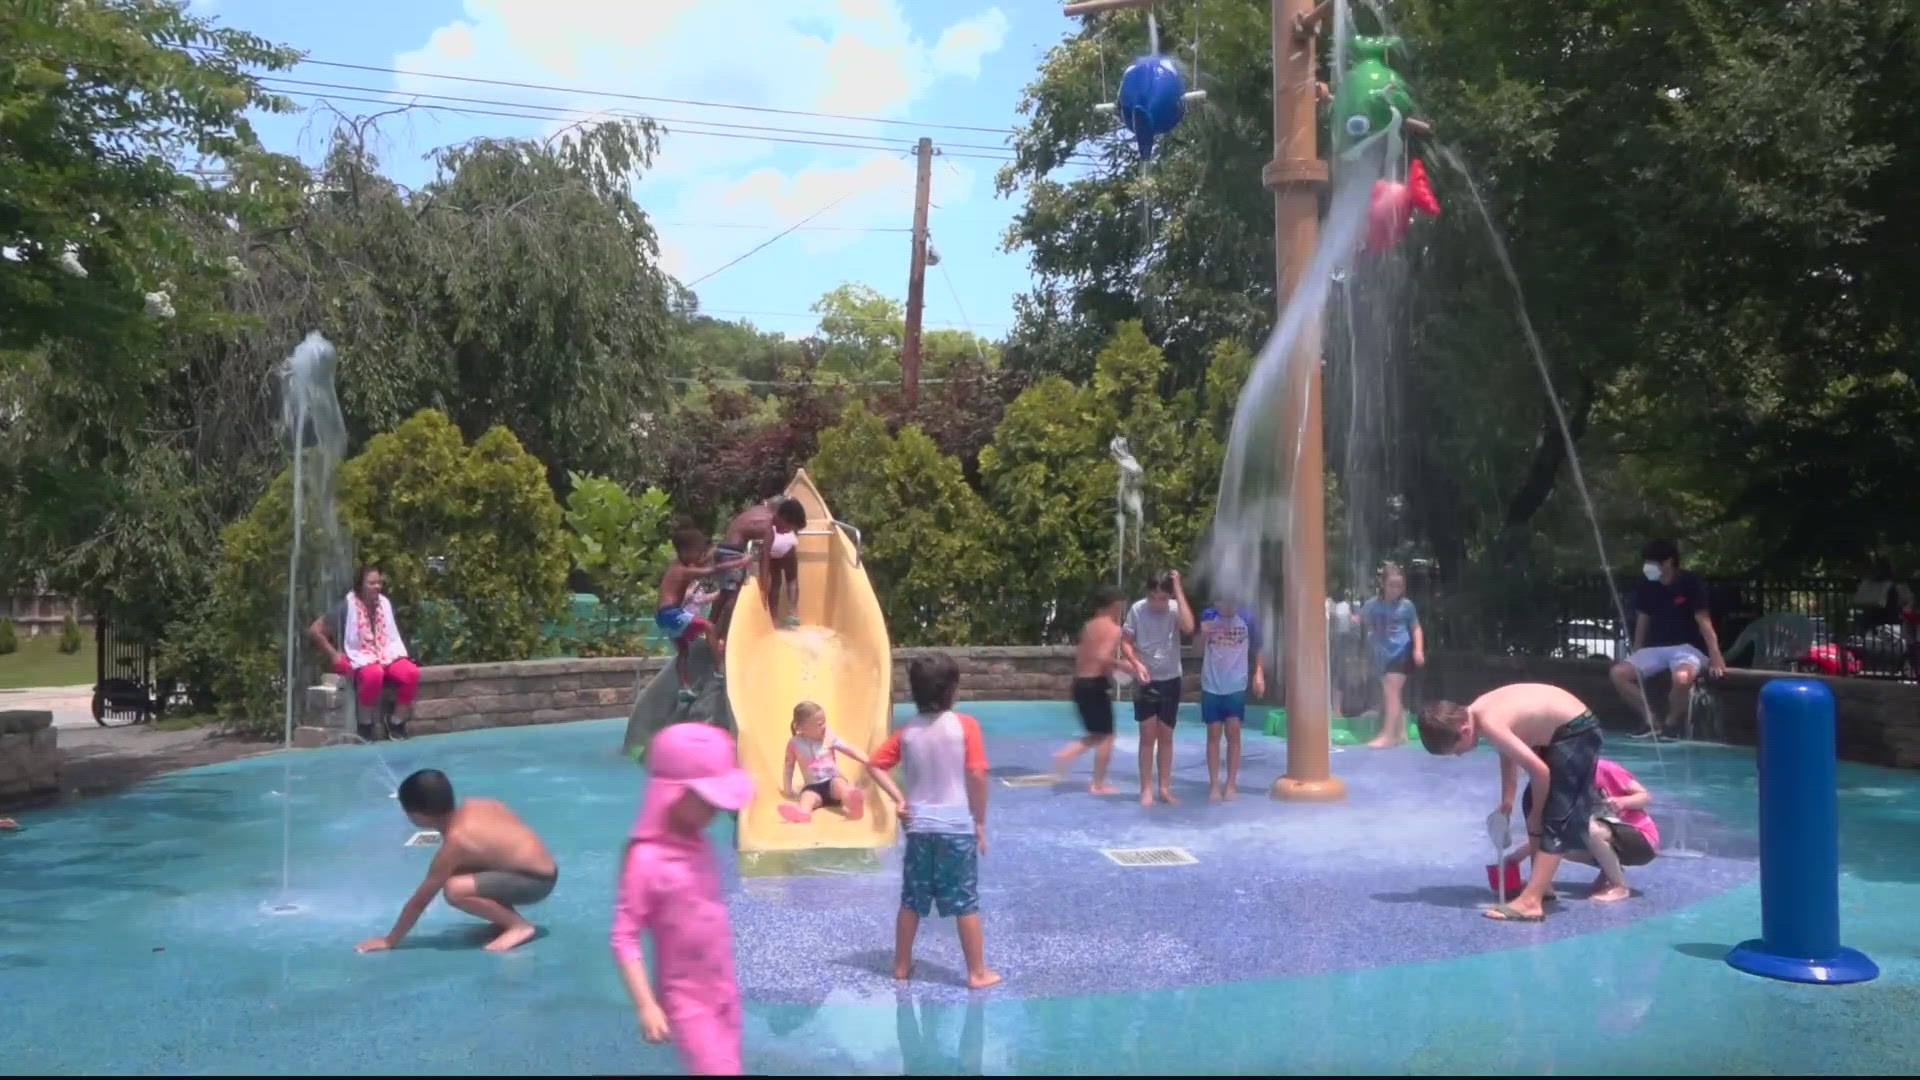 The selected spray parks will be open daily from noon until 4 p.m.